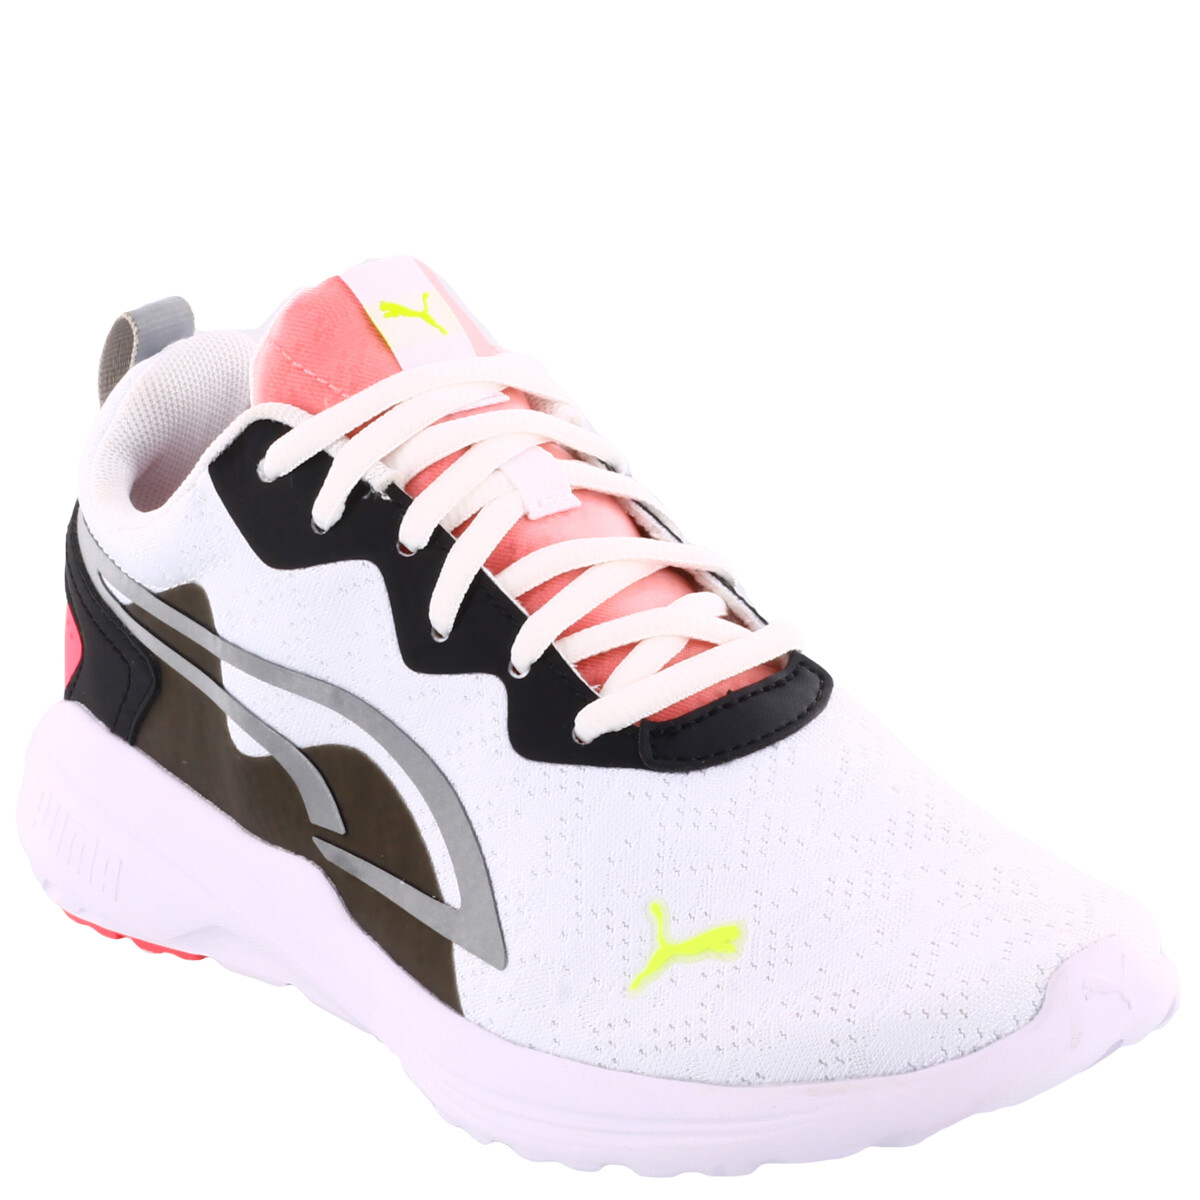 All Day Active in Motion Puma - Blanco/Negro/Rosa 